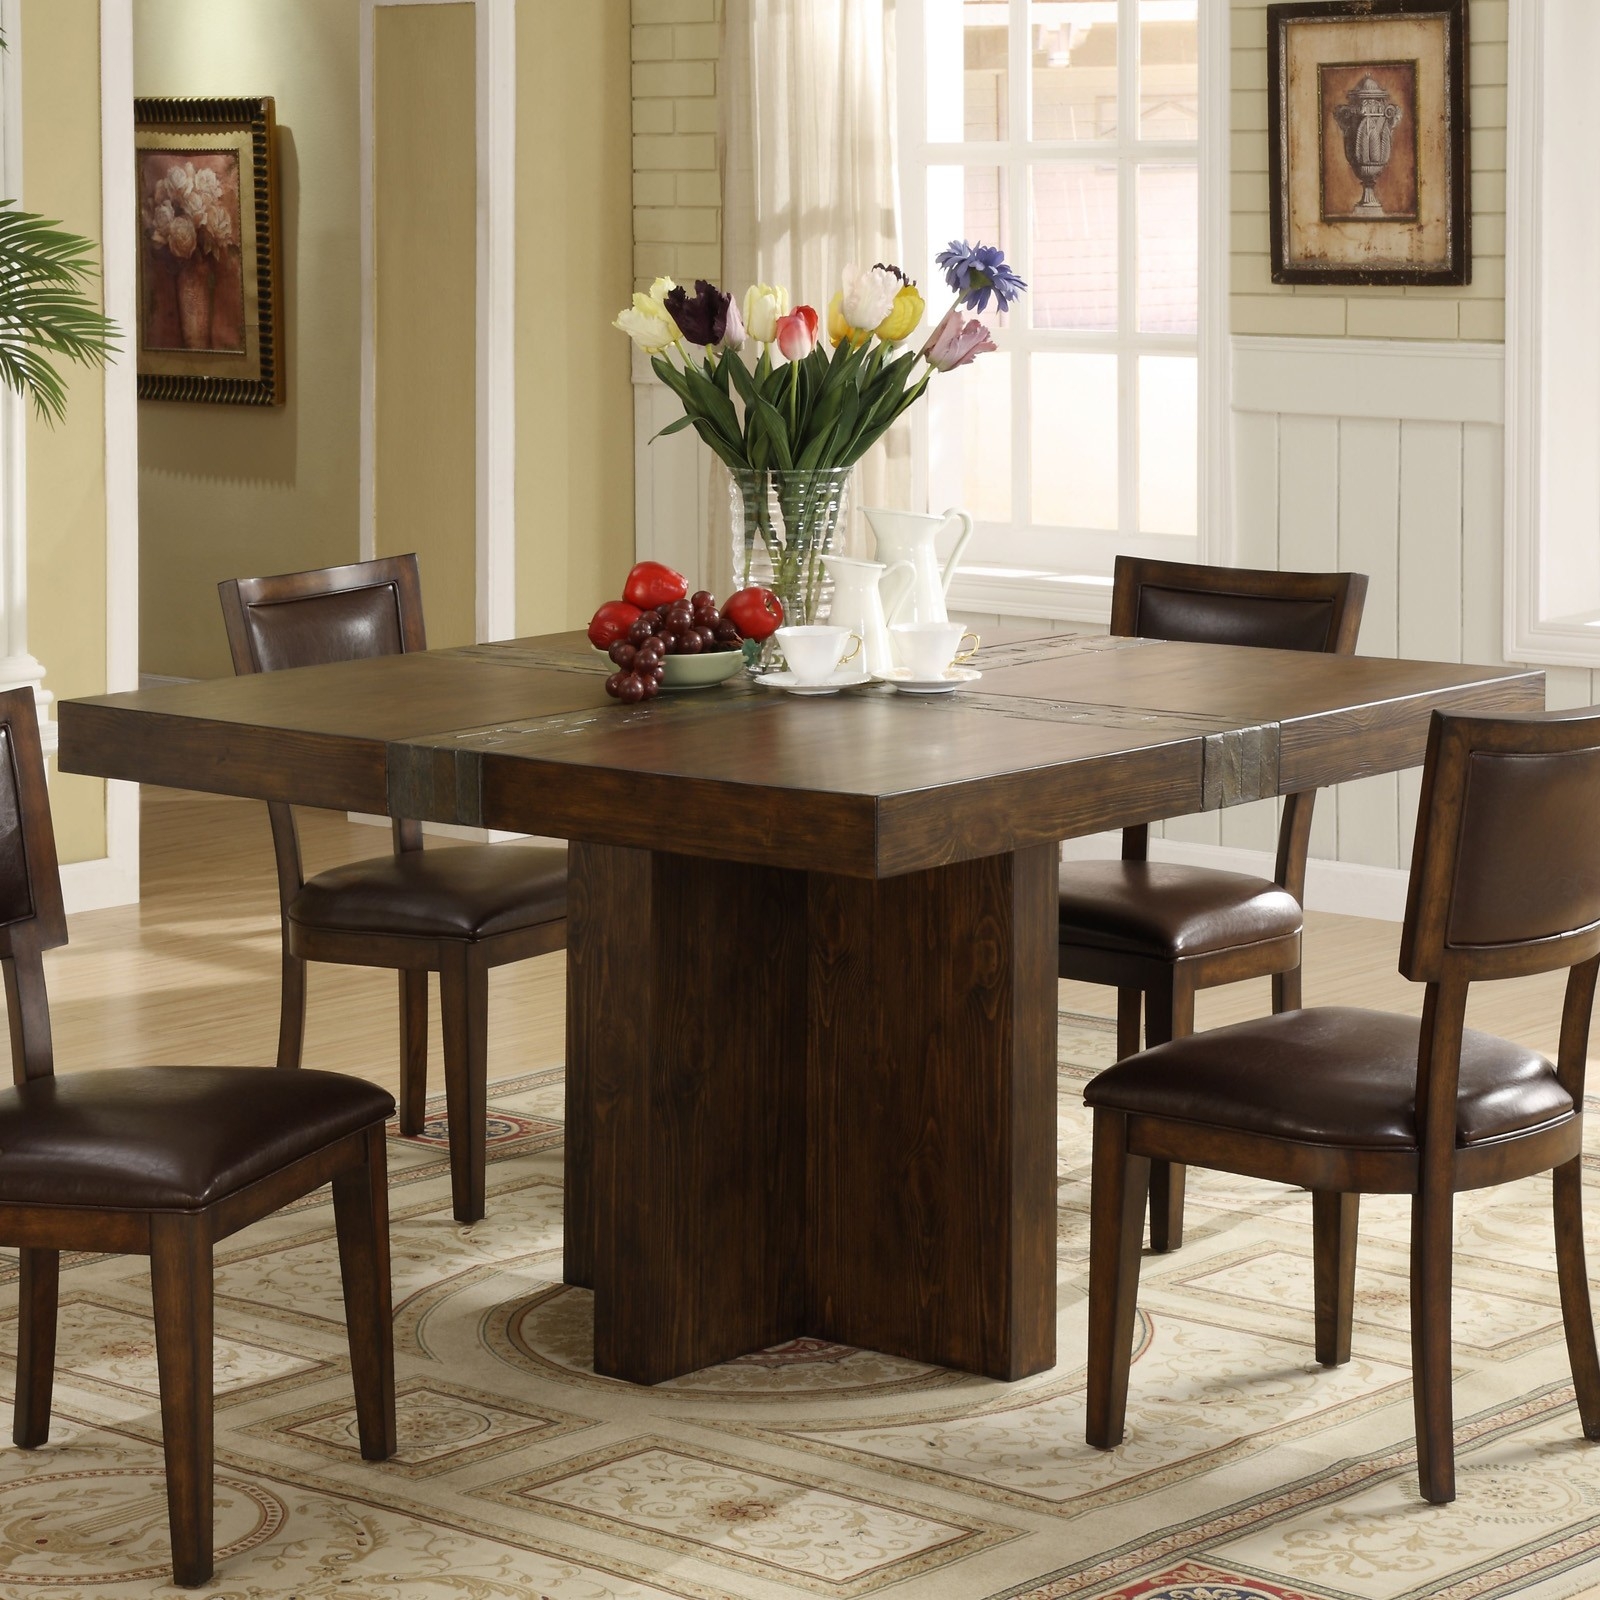 Square Dining Room Table Seats 8 For 2020 Ideas On Foter